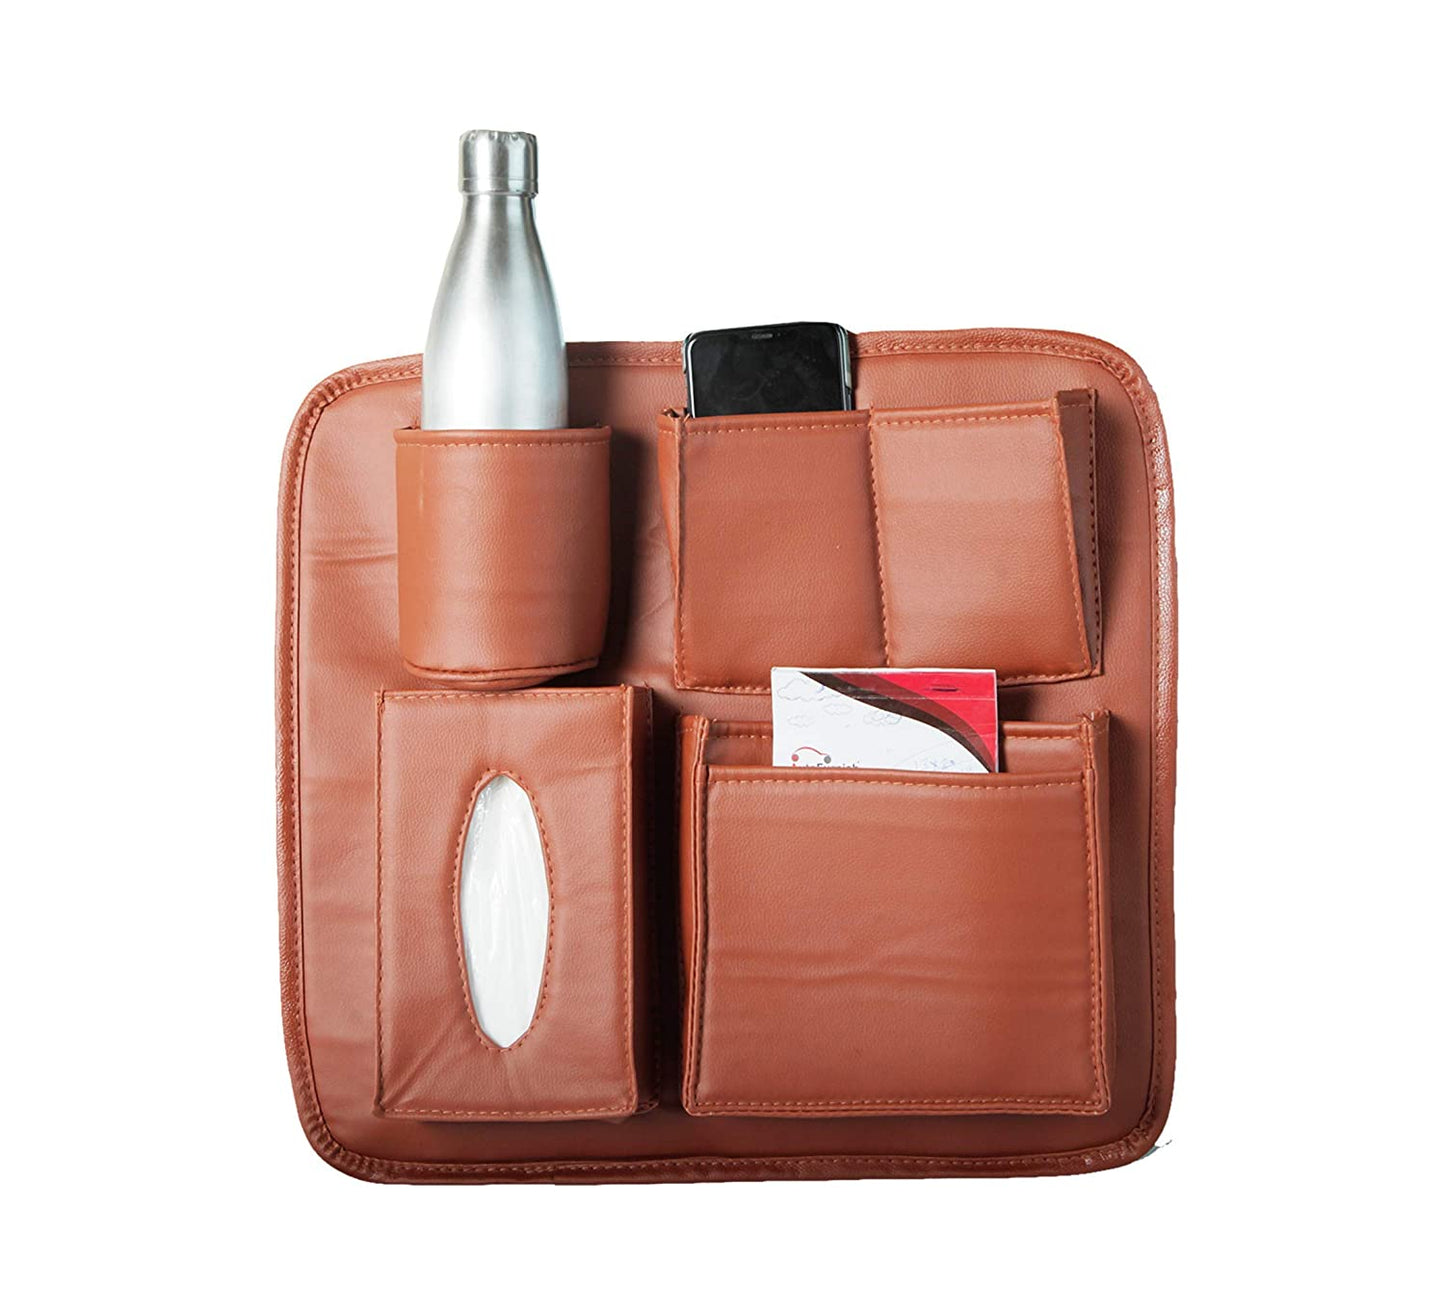 COMPACT Car Seat Organizer | PU Leather with 6 Pockets - Tissues, Bottles, Phone, iPad Mini, Documents